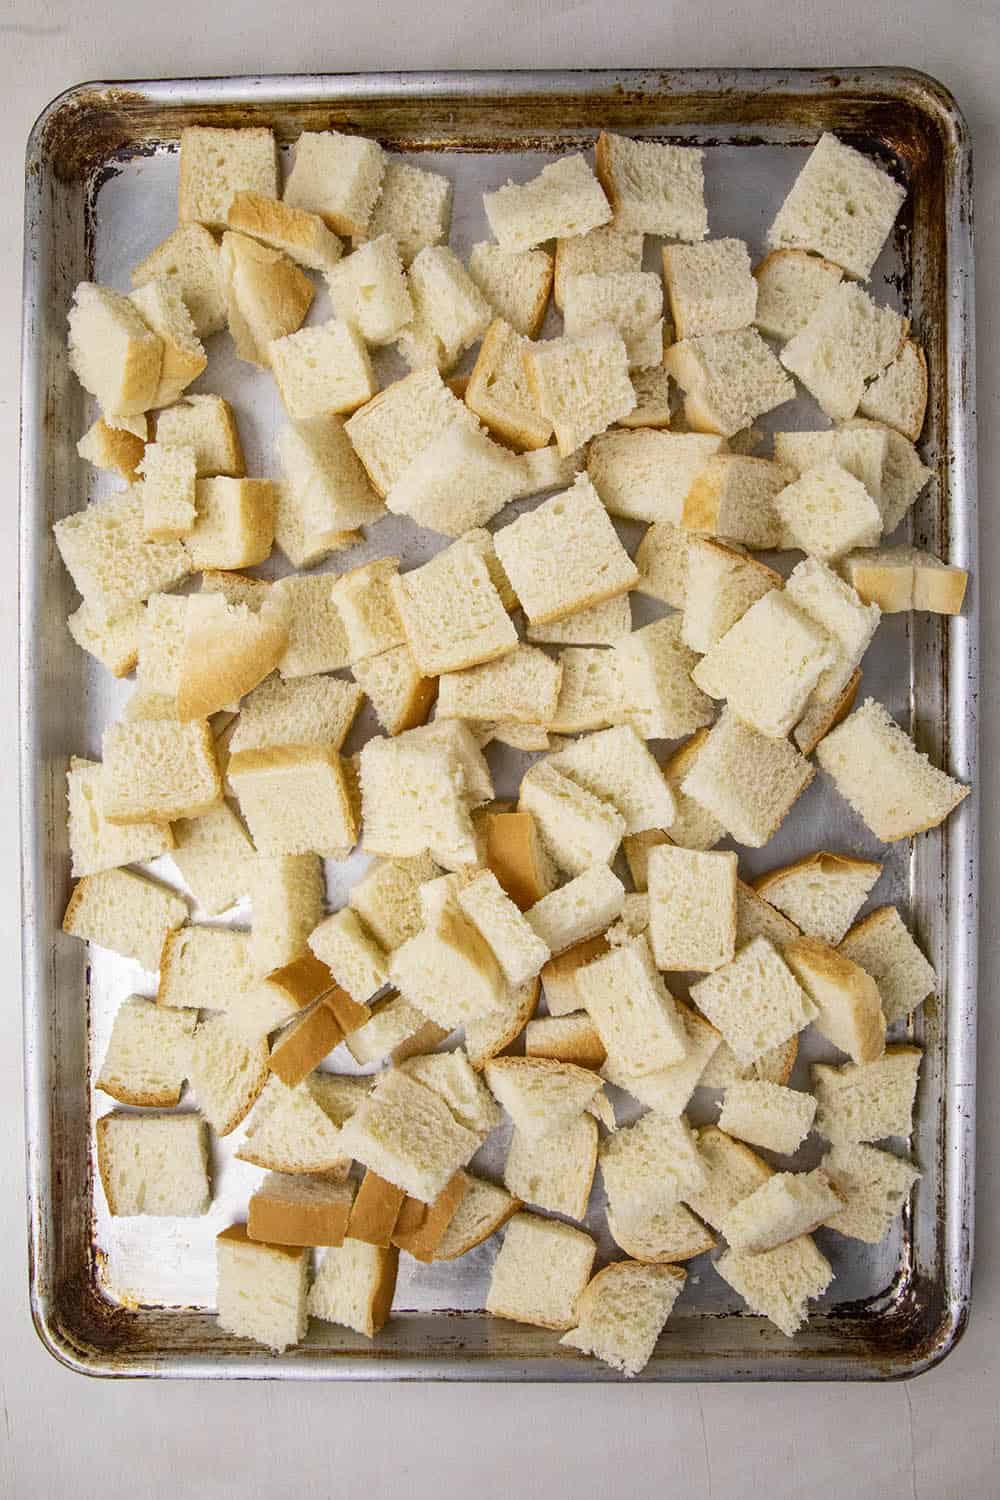 Cubed bread on a baking sheet, ready to dry out